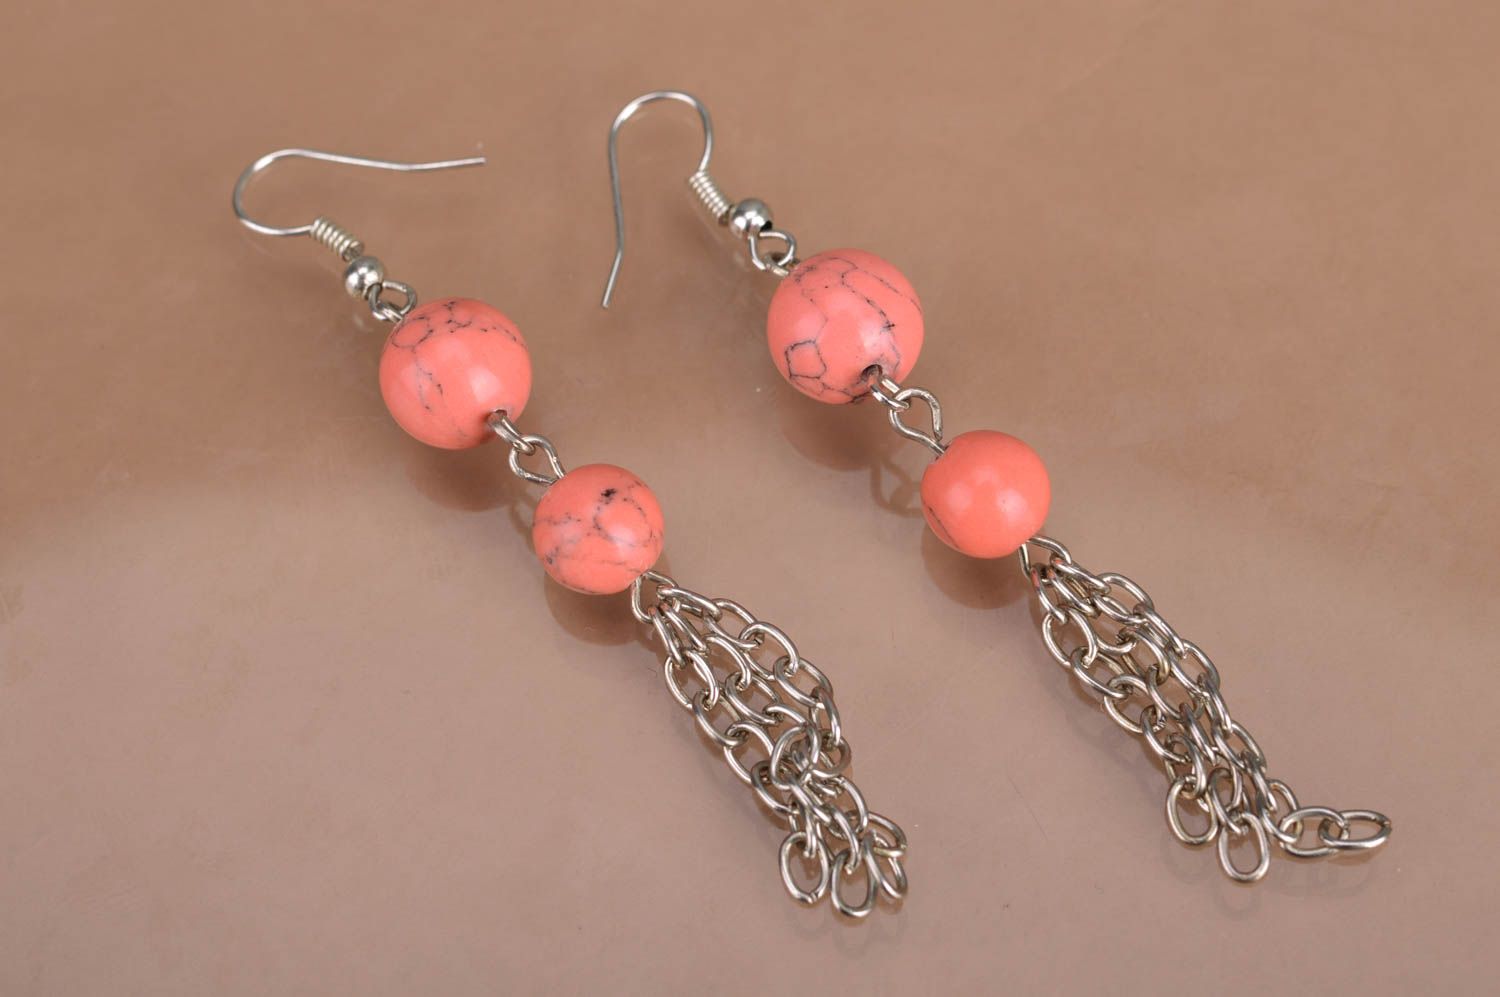 Handmade designer dangle earrings with pink round beads and metal chains photo 2